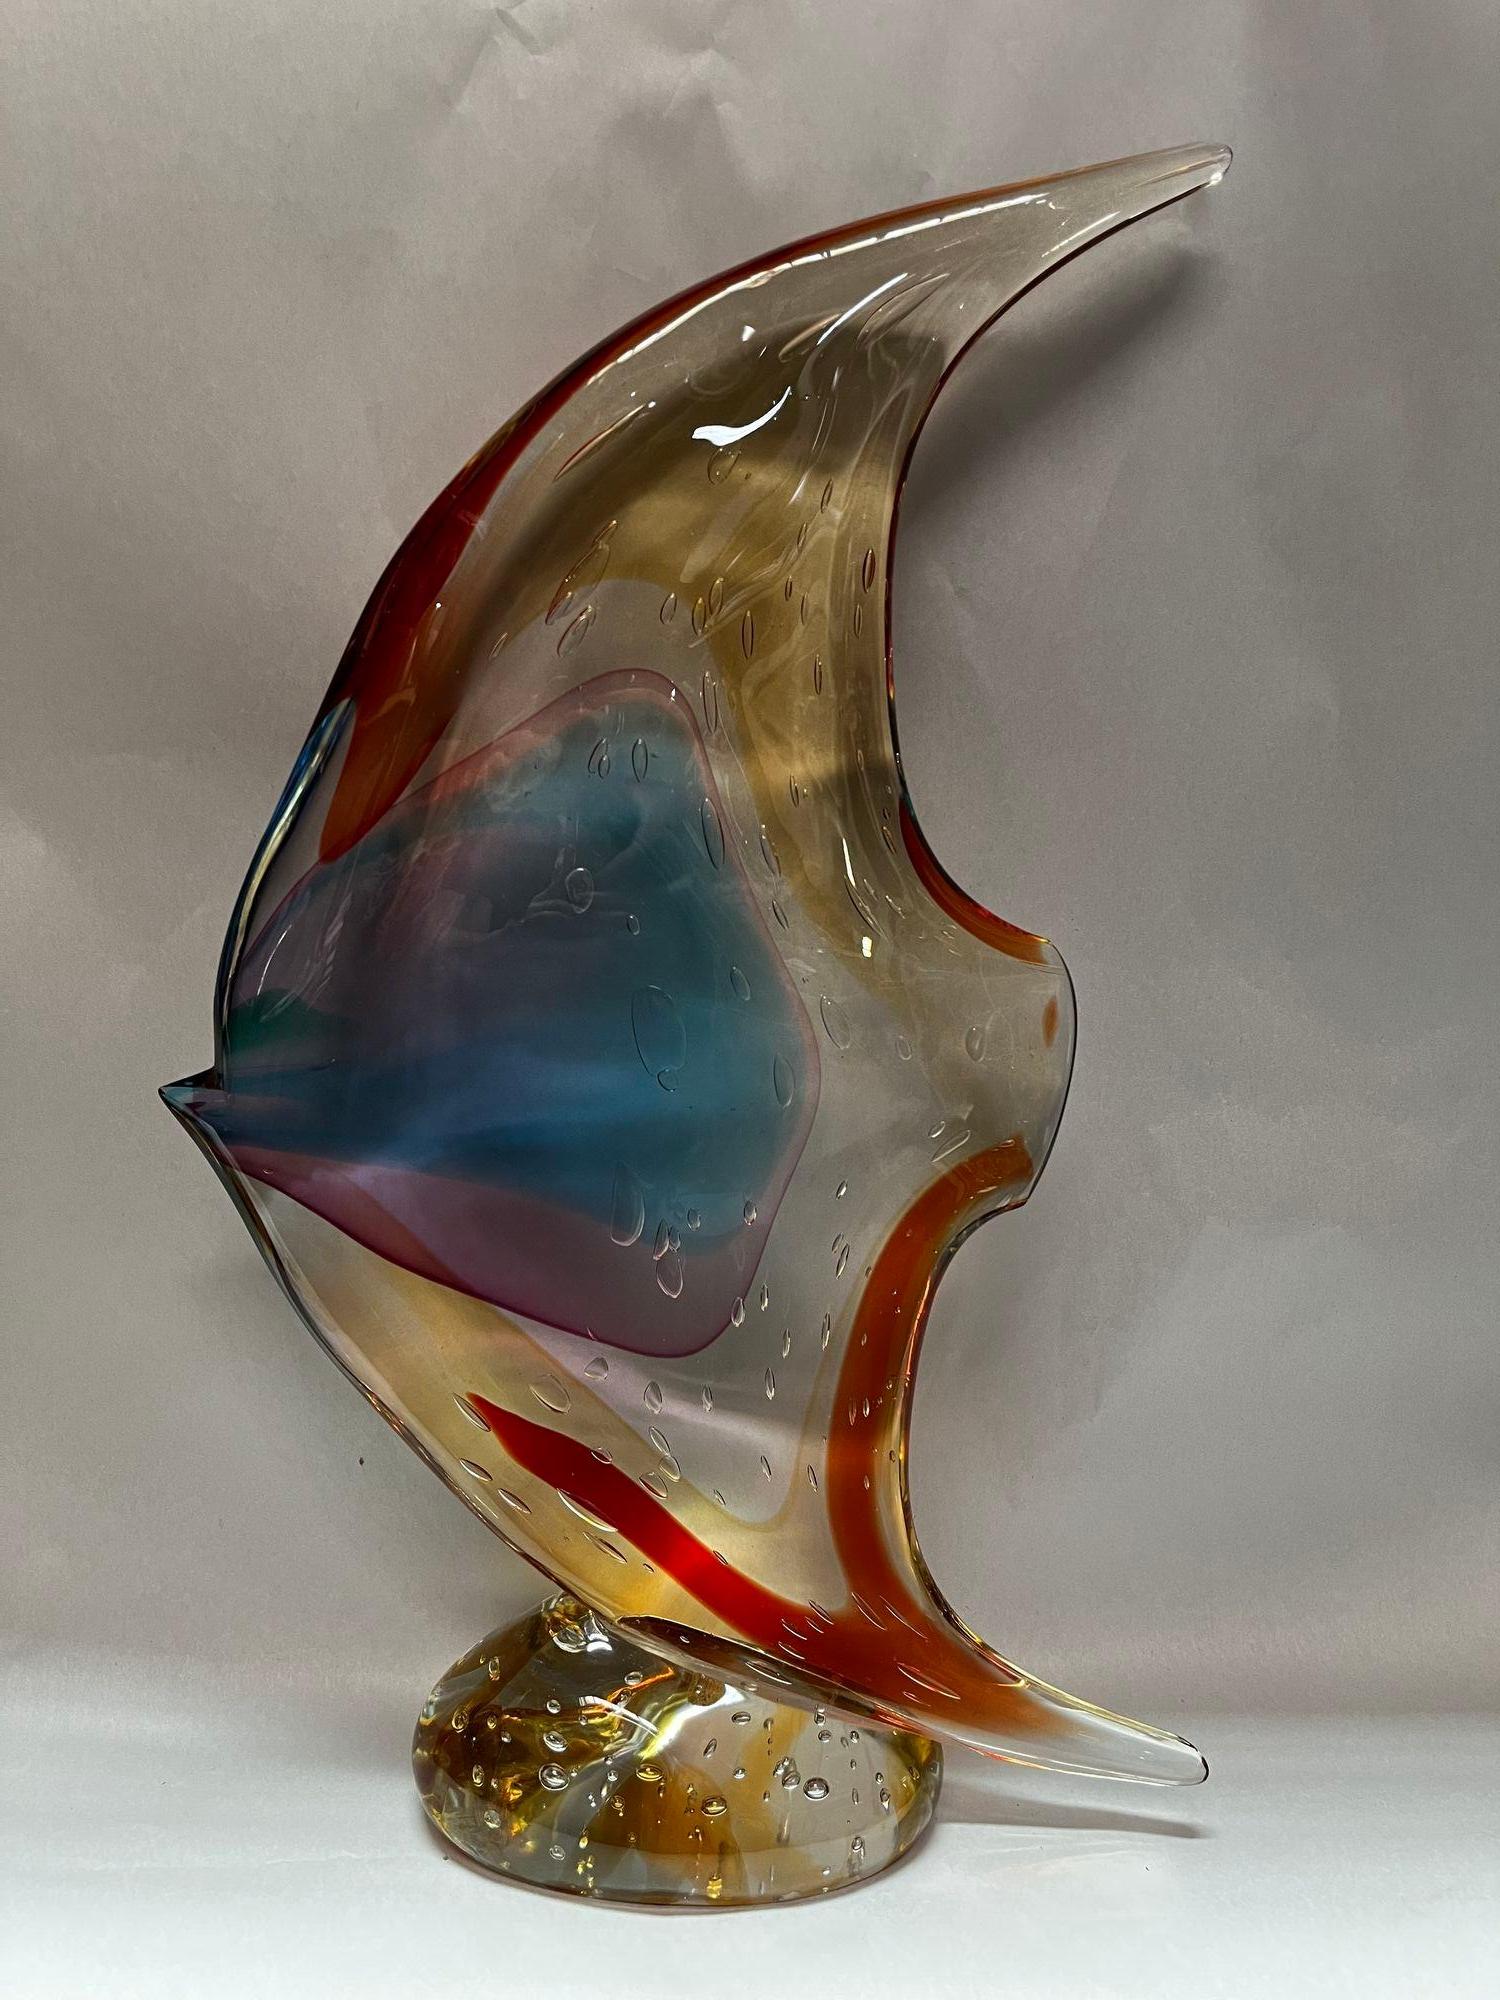 Murano glass fish sculpture by Sergio Costantini for Vetro Artistico Murano with brown, red, amber, yellow and blue tones.
Made in Italy, 20th century (Includes sticker and signature)
Dimensions: 20